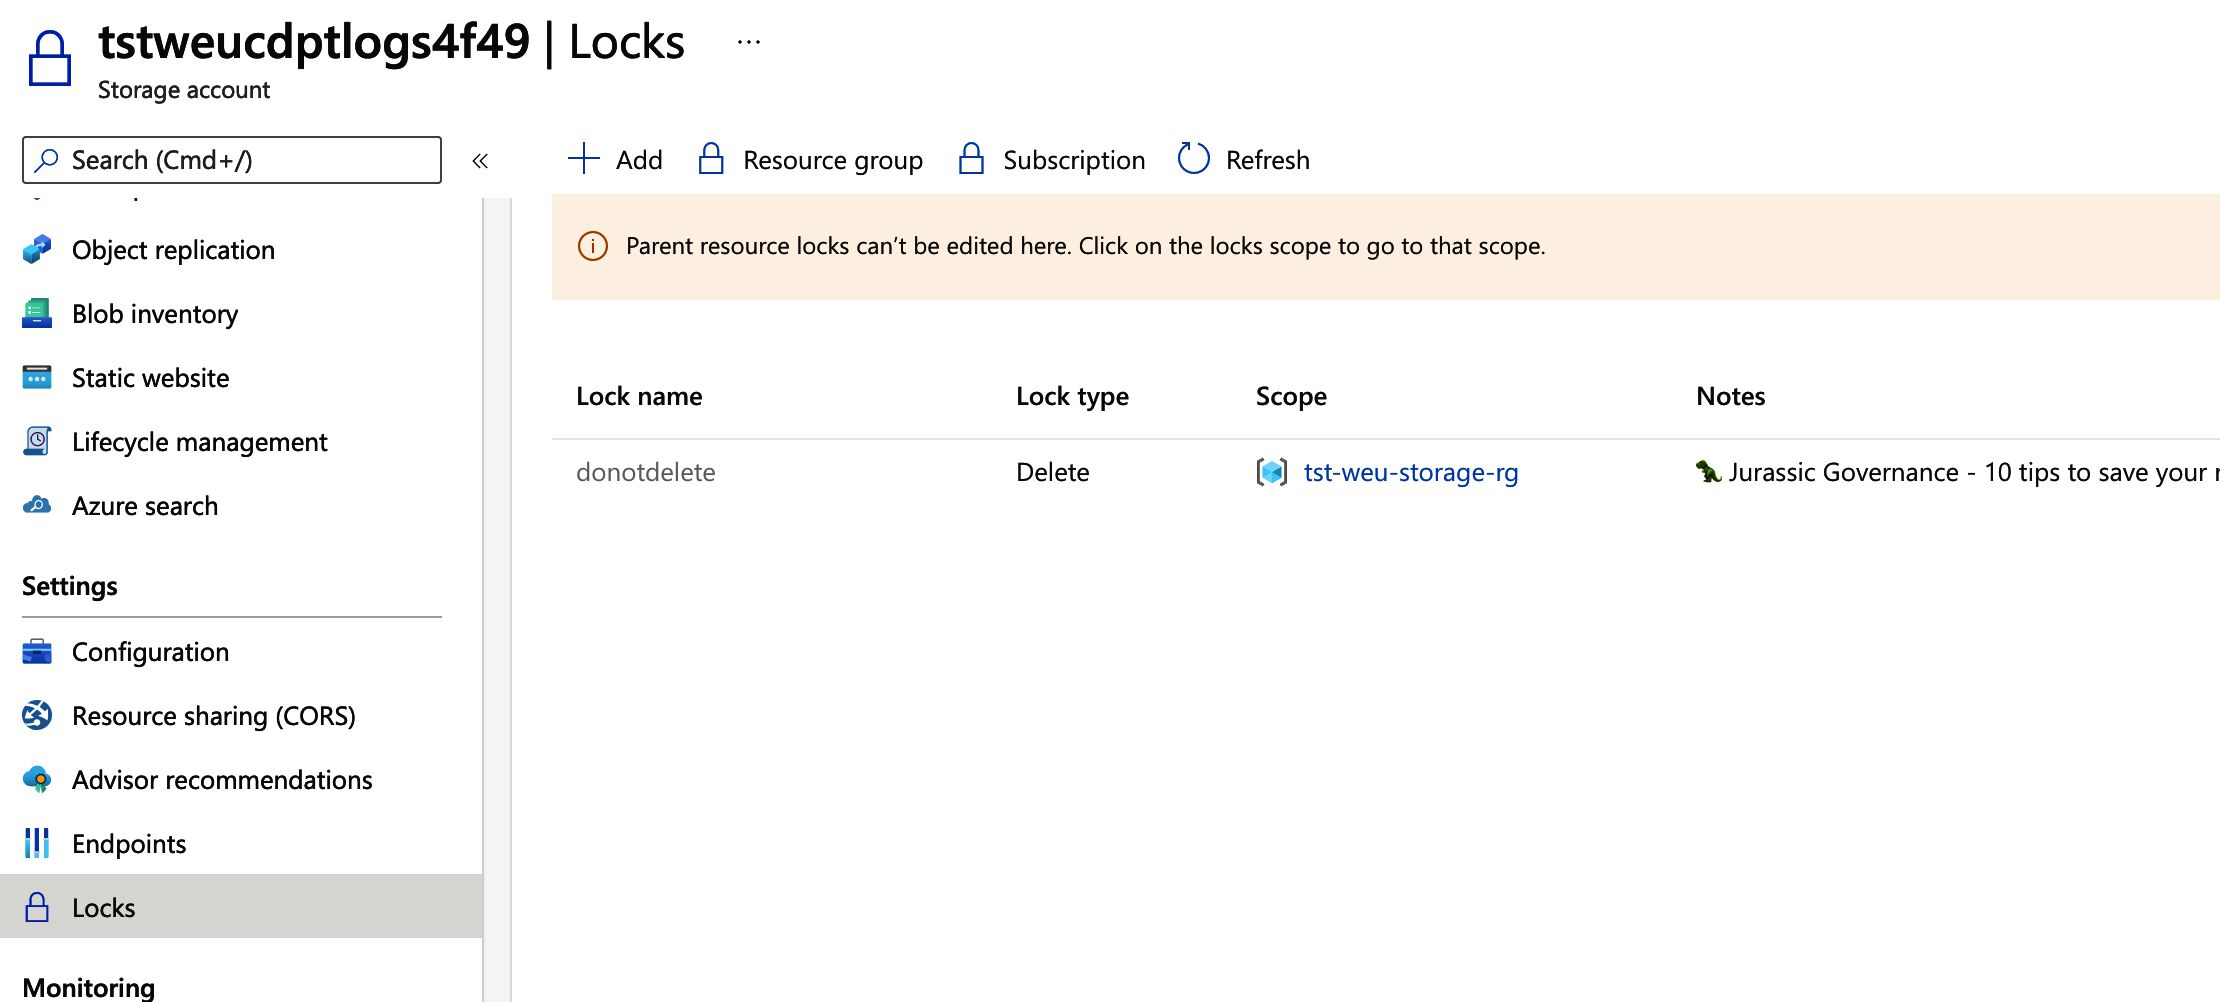 Image of the storage account locks settings view in the Azure Portal, a do not delete entry is listed. This entry its scope set to &rsquo;tst-weu-storage-rg&rsquo;. A message is also visible above the locks list, it reads: &ldquo;Parent resource locks can&rsquo;t be edited here. Click on the locks scope to go to that scope.&rdquo;